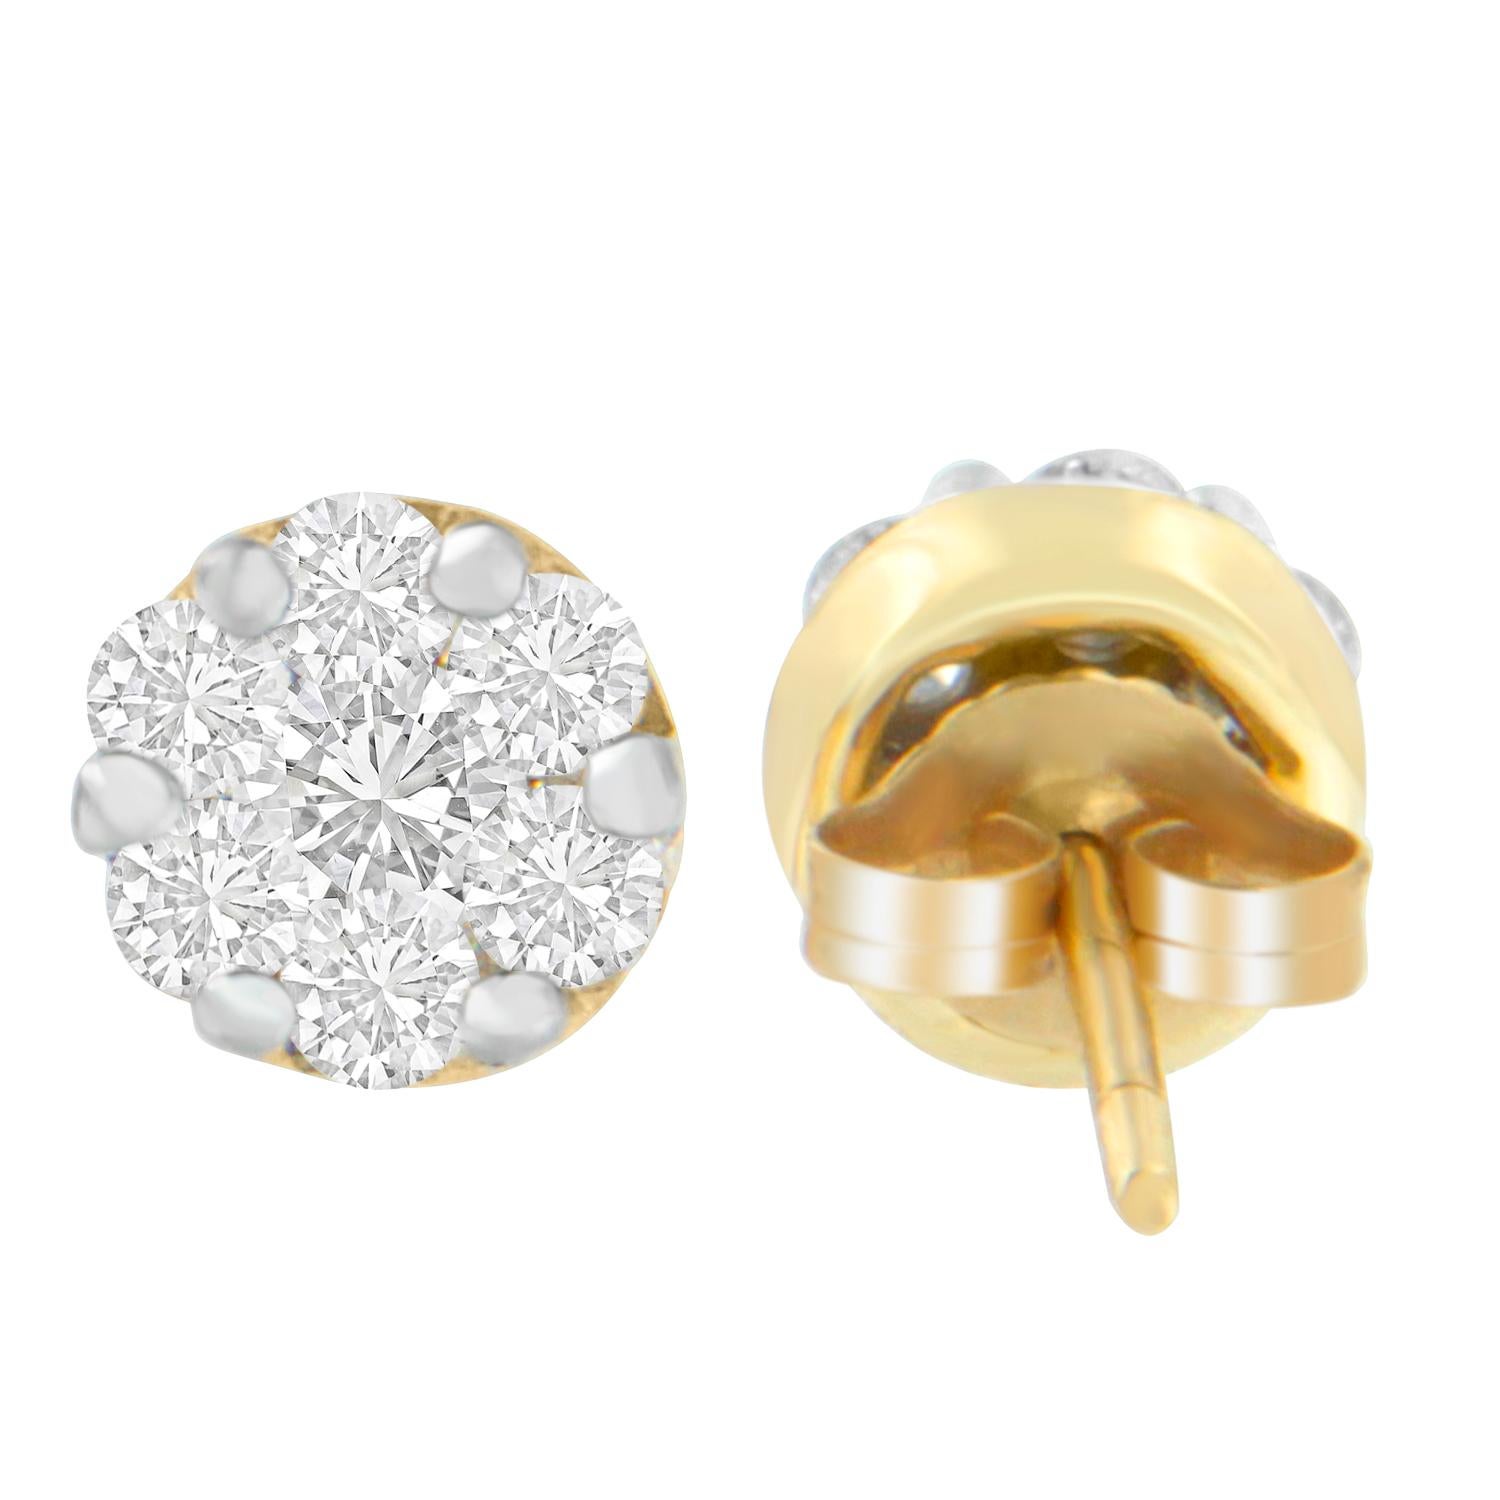 Make a statement with these amazing 3/4 carat round diamond cluster stud earrings, crafted of beautiful 14-karat heart Yellow gold. These incredible earrings will give you that classy look that you've always wanted. Wear it up for a casual everyday